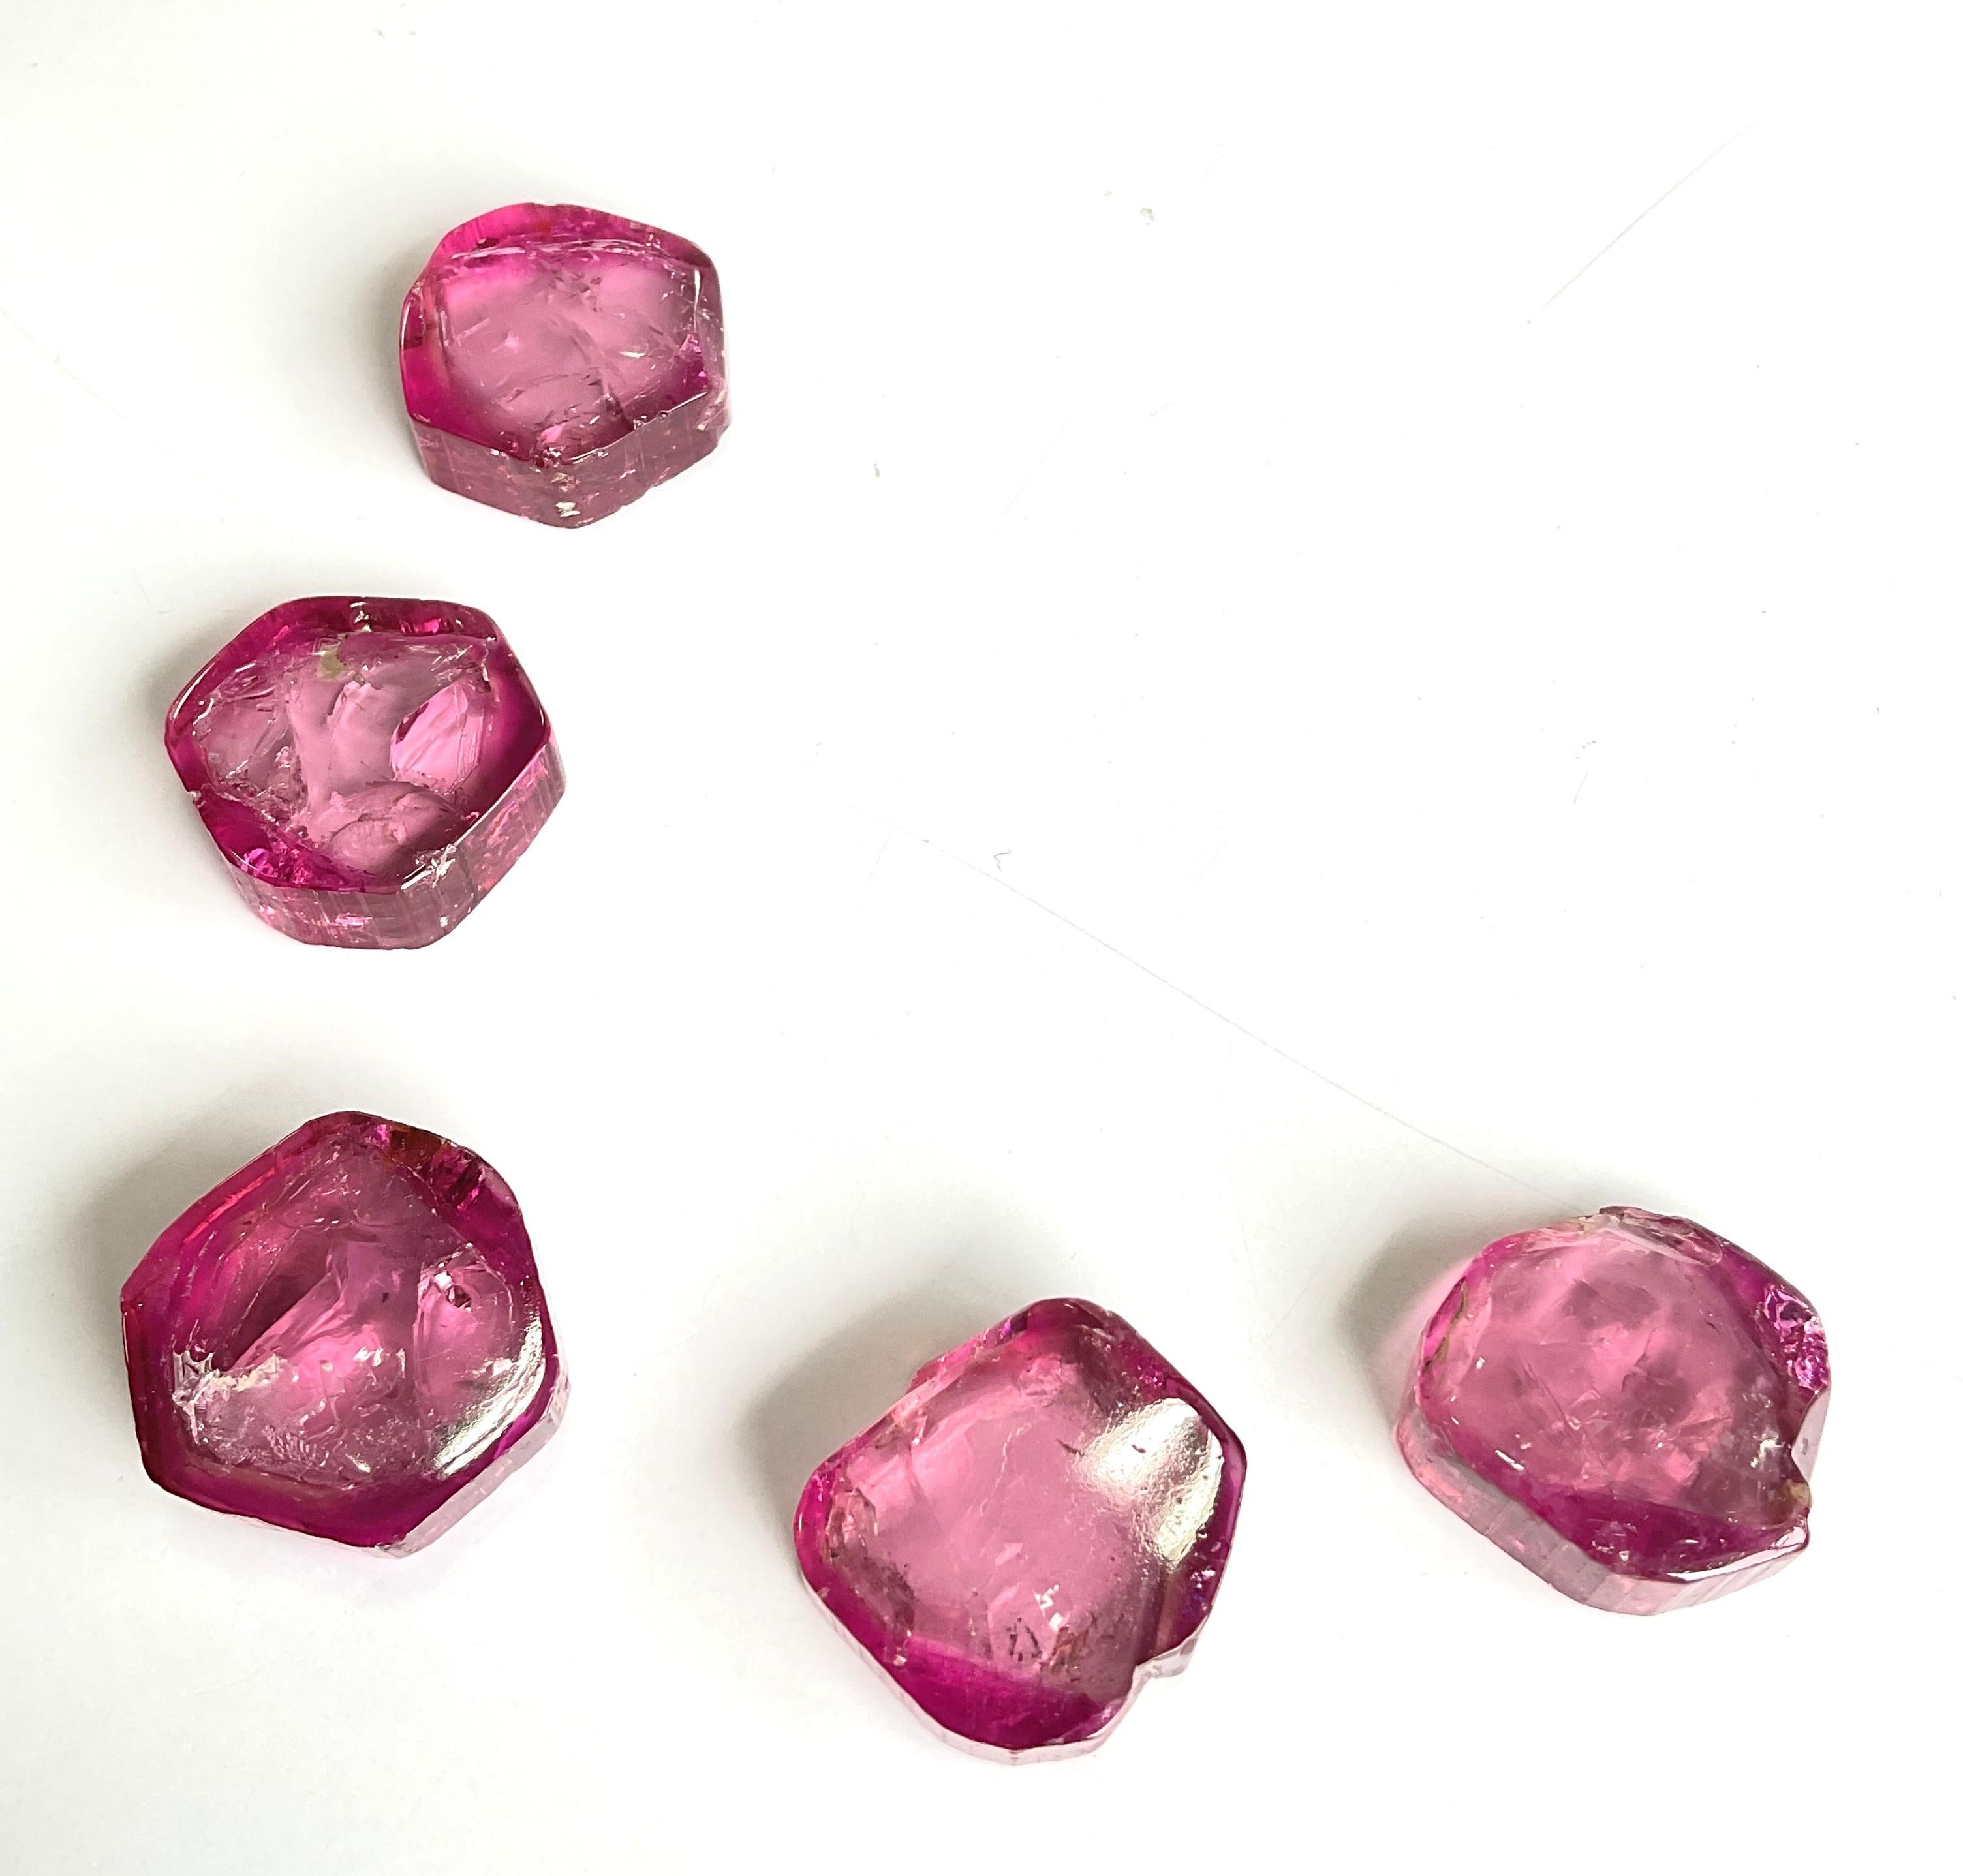 239.56 Carats Pink Color Tourmaline Natural Slices For Top Fine Jewelry Gemstone For Sale 1